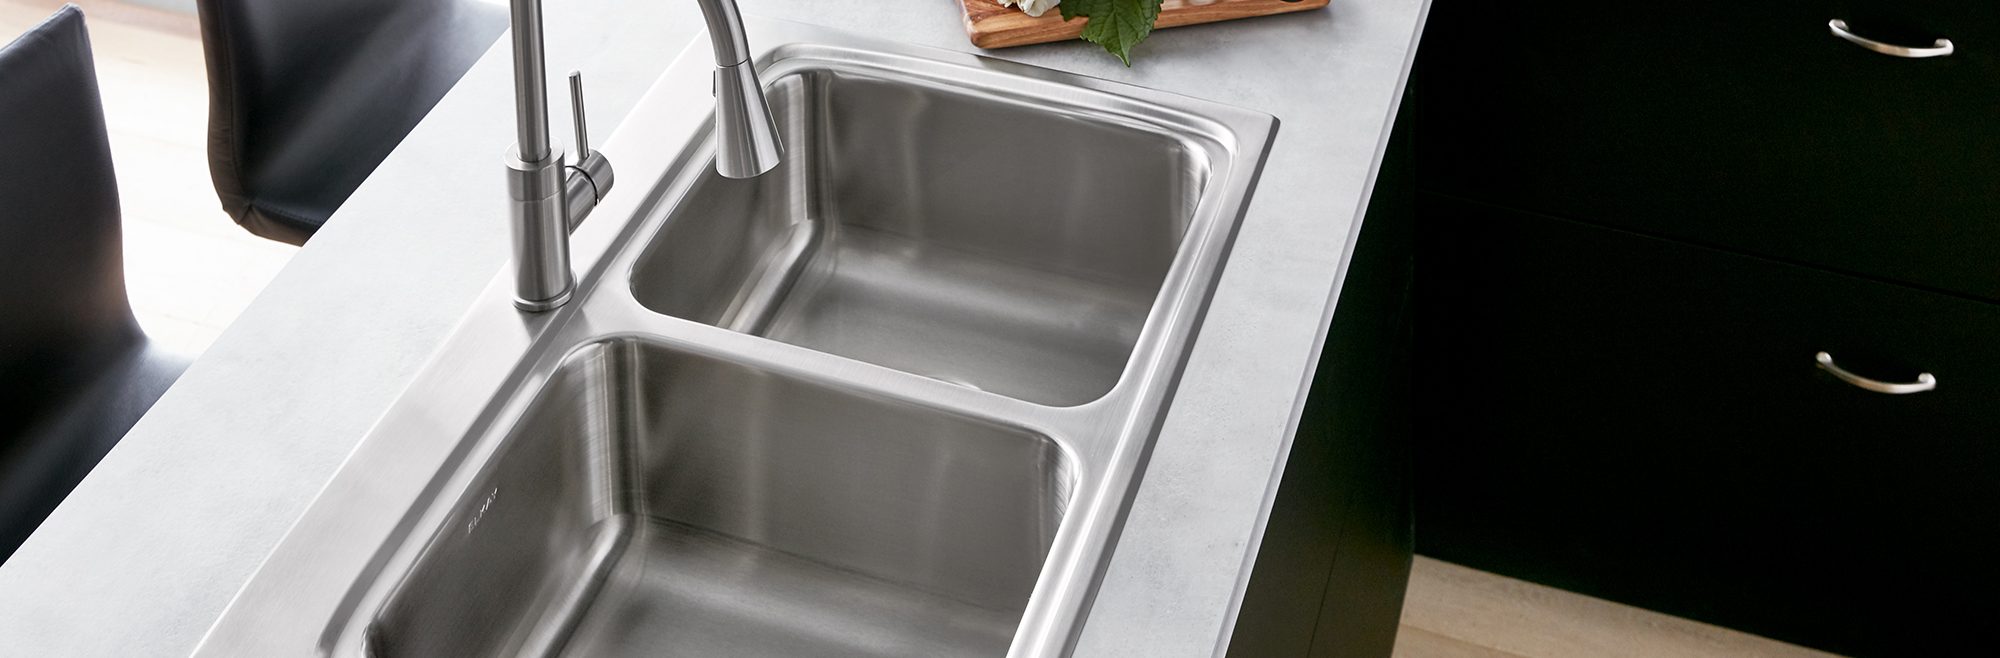 Lustertone Classic Stainless Steel 1-Hole Equal Double Bowl Drop-in Sink